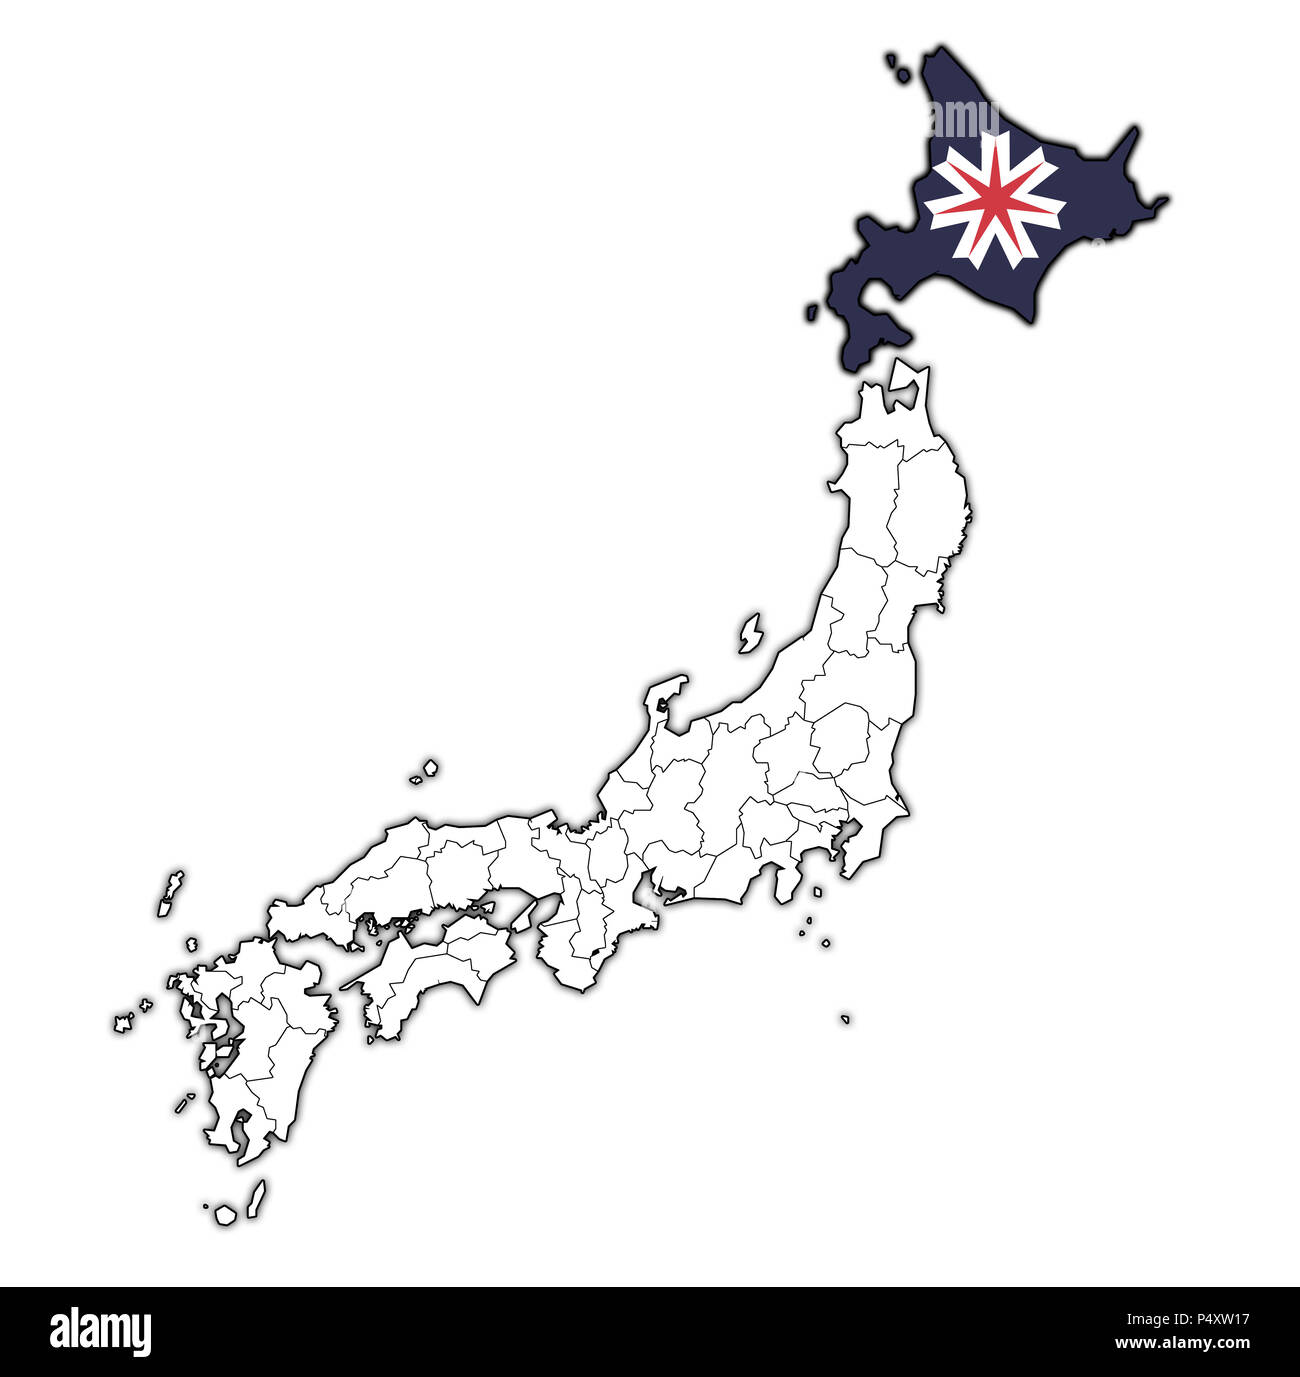 hokkaido flag of Troms prefecture on map with administrative divisions and borders of japan Stock Photo